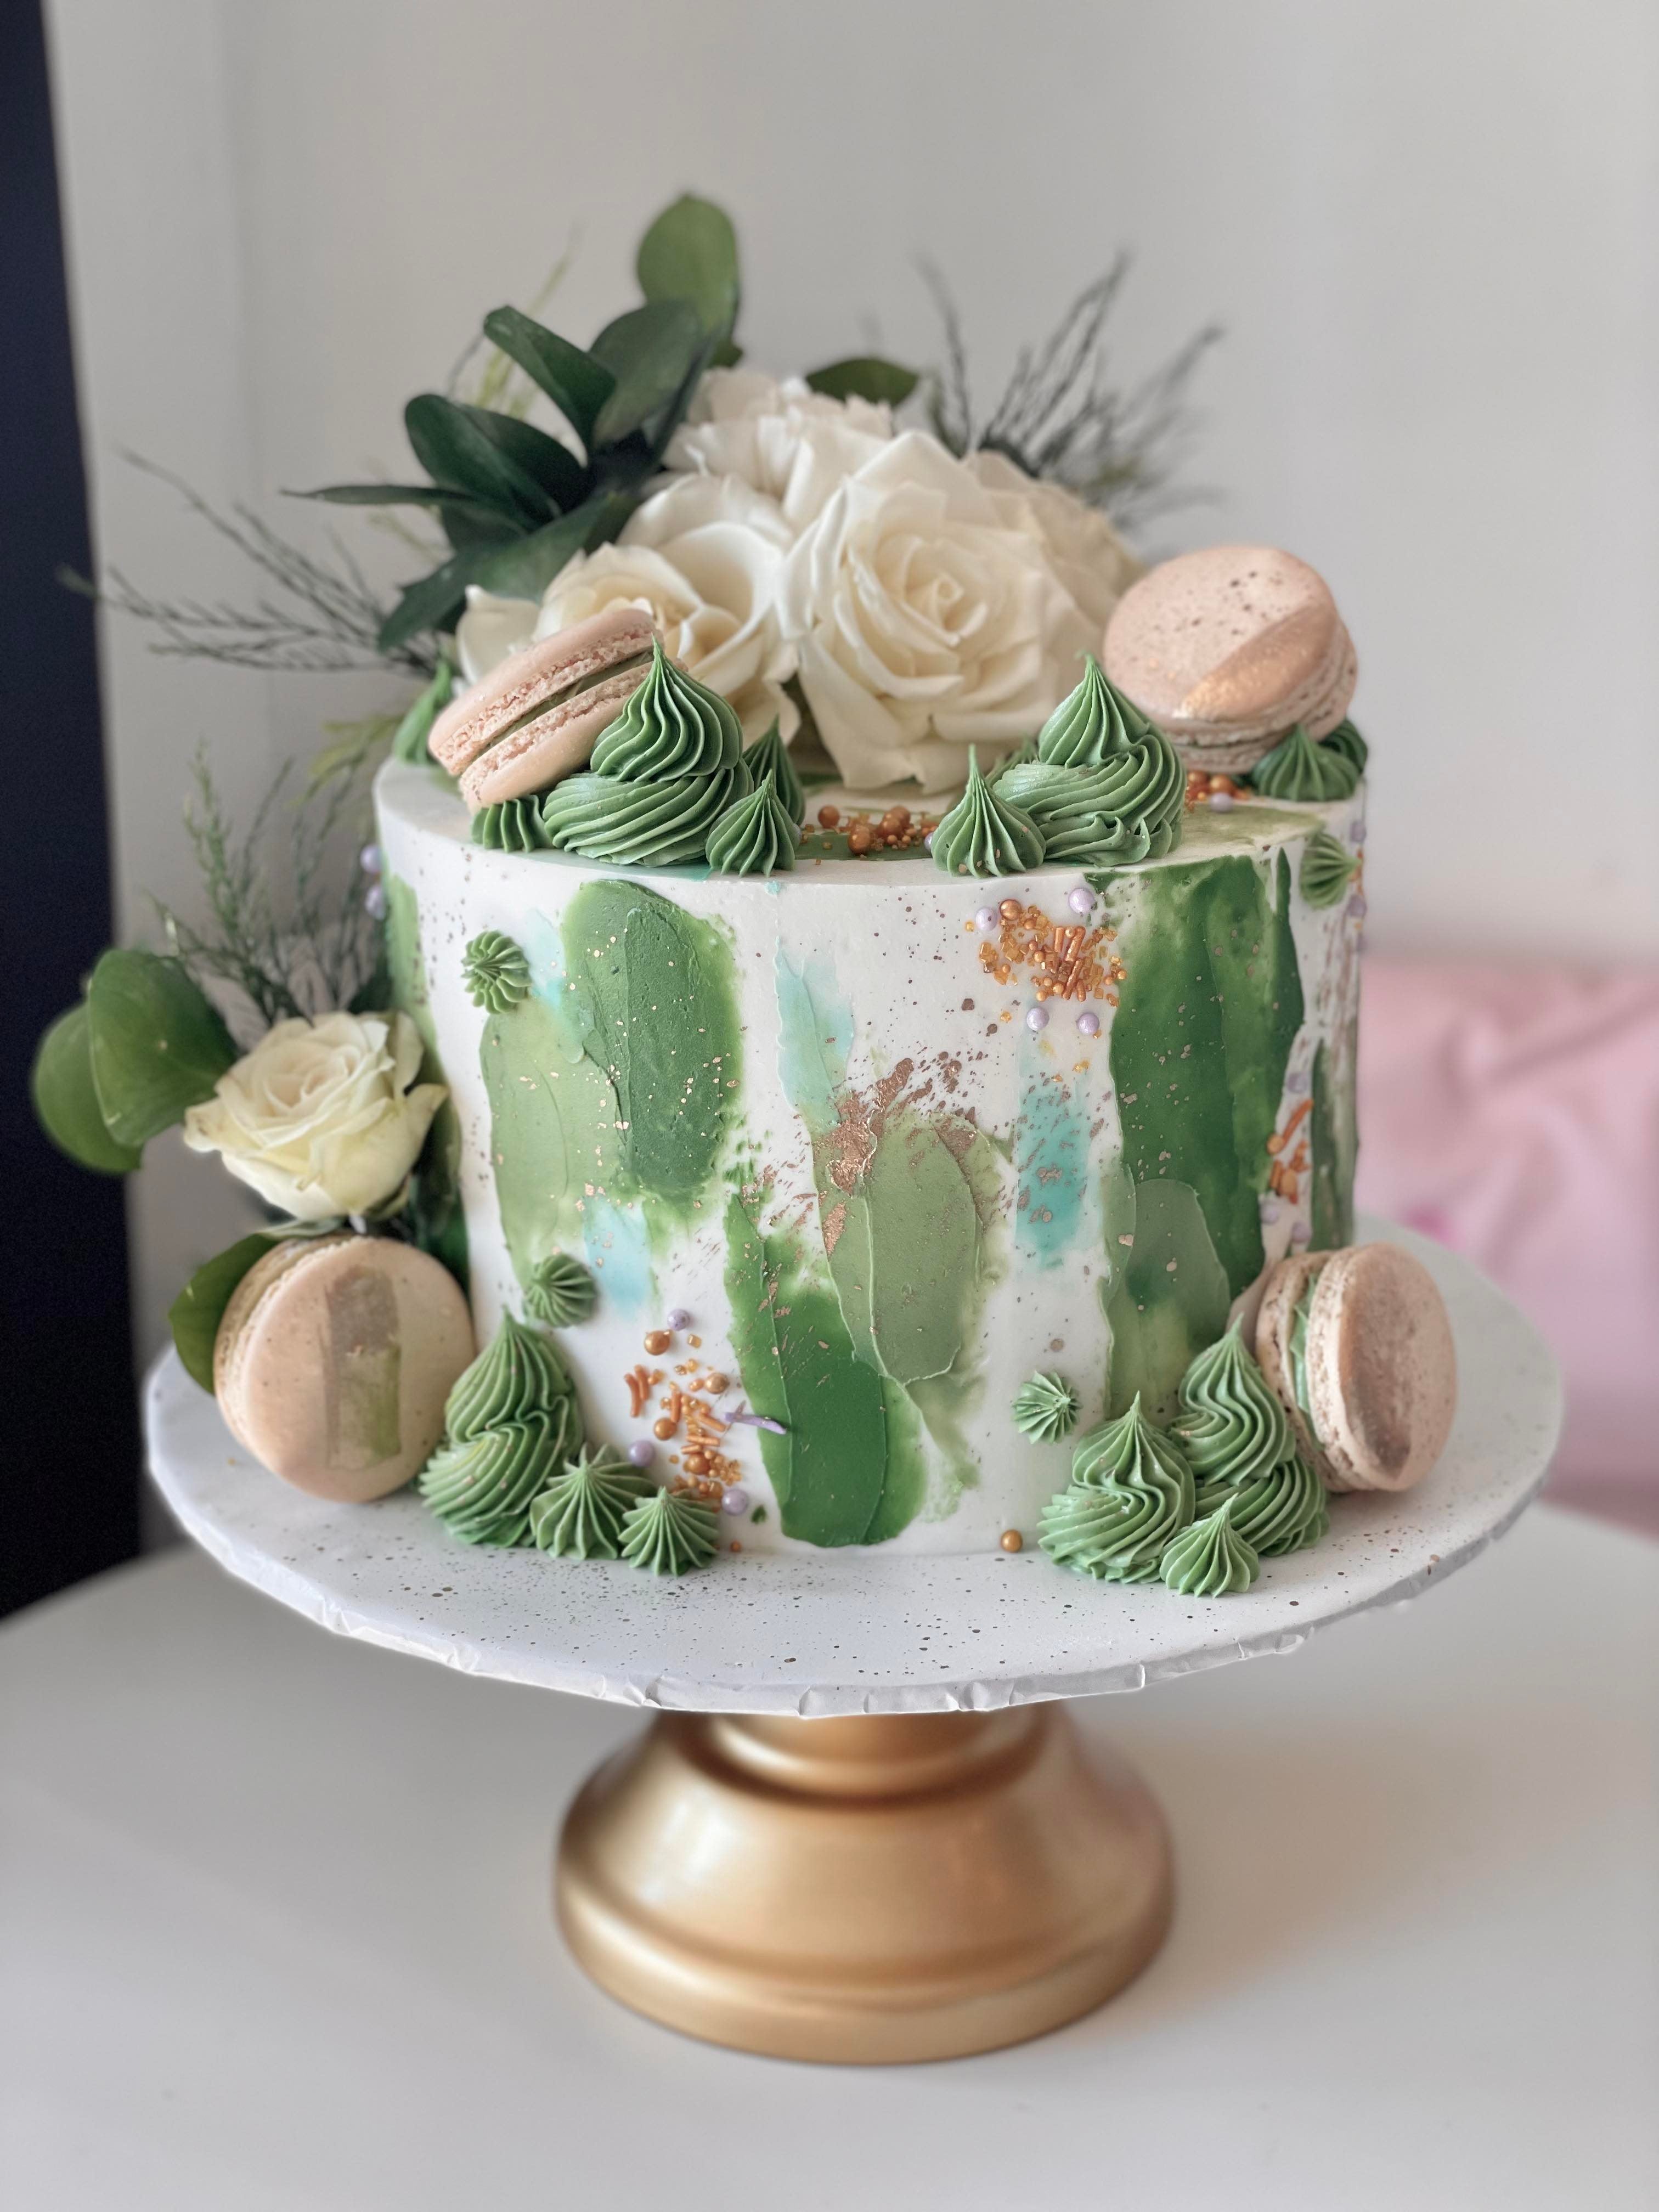 7 Bakers Whose Artistic Cakes Belong in a Contemporary Art Museum | New cake  design, Cake art, Cake decorating